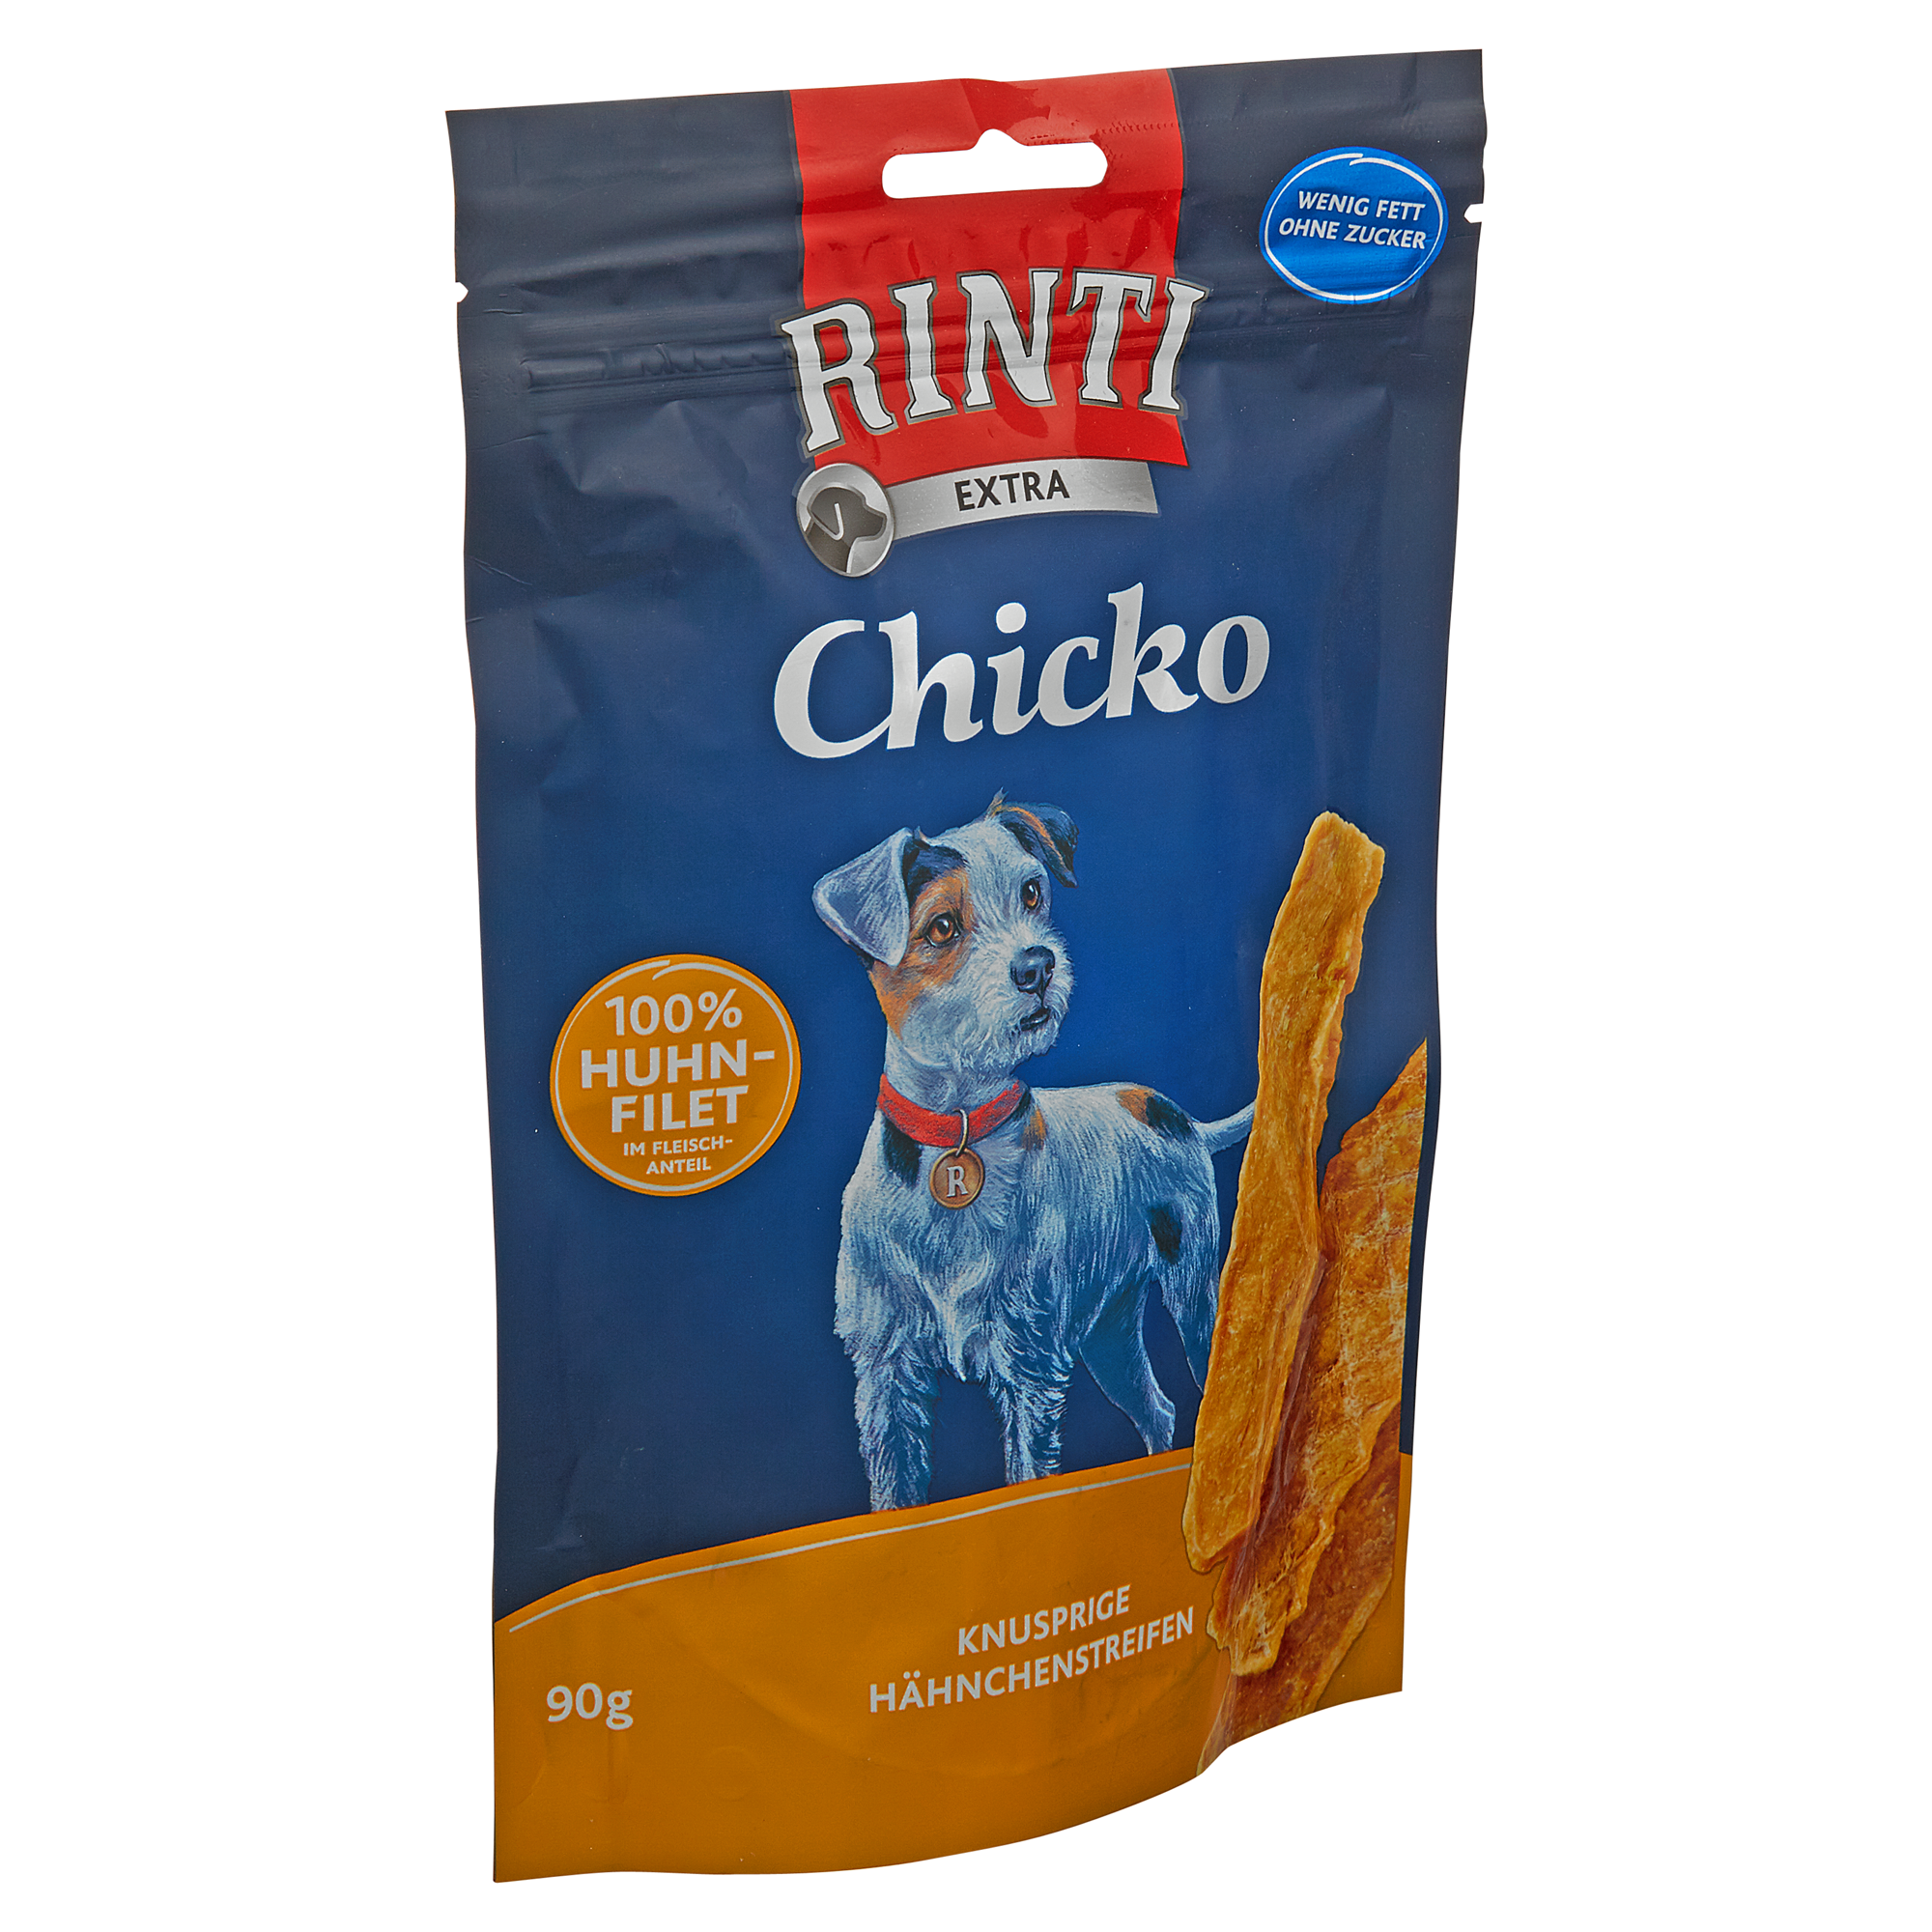 Hundesnack "Chicko" Extra mit Huhn 90 g + product picture